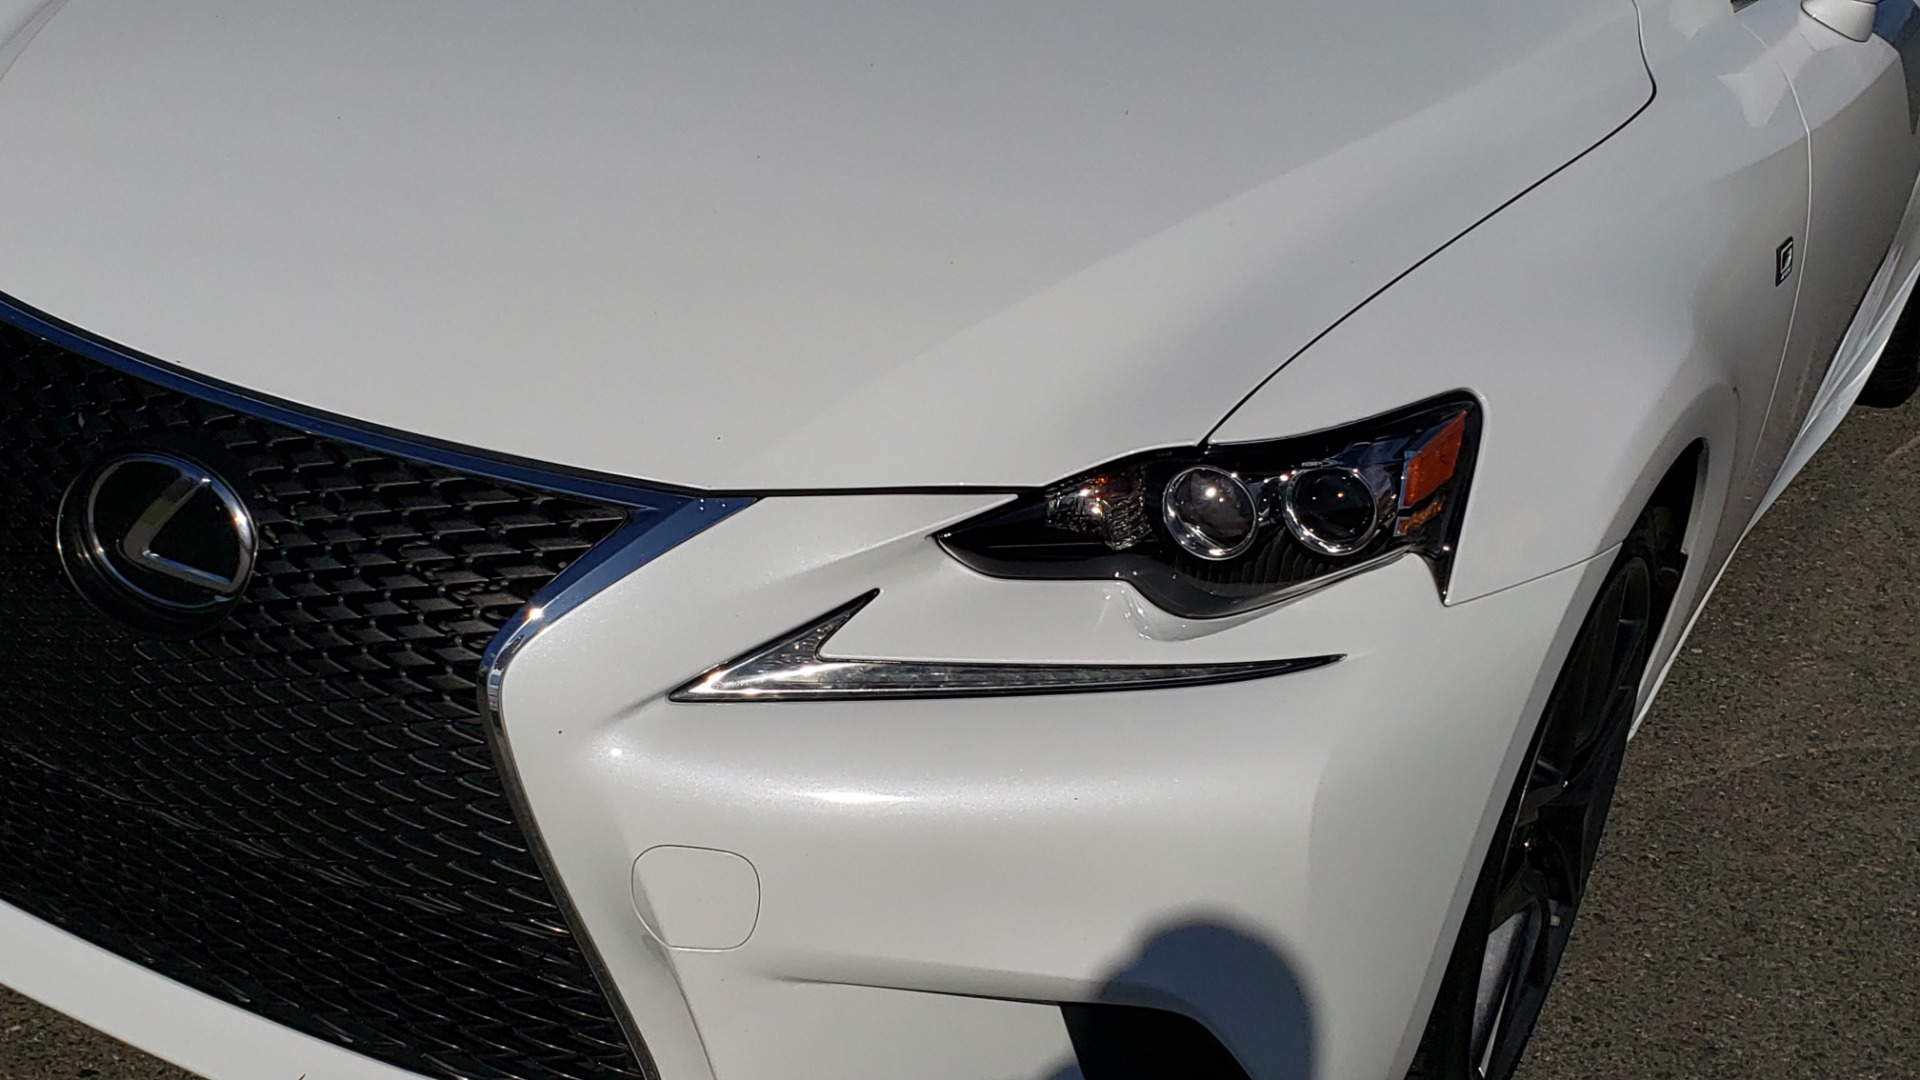 Used 2014 Lexus IS 250 F-SPORT / NAV / SUNROOF / REARVIEW / BSM for sale Sold at Formula Imports in Charlotte NC 28227 22